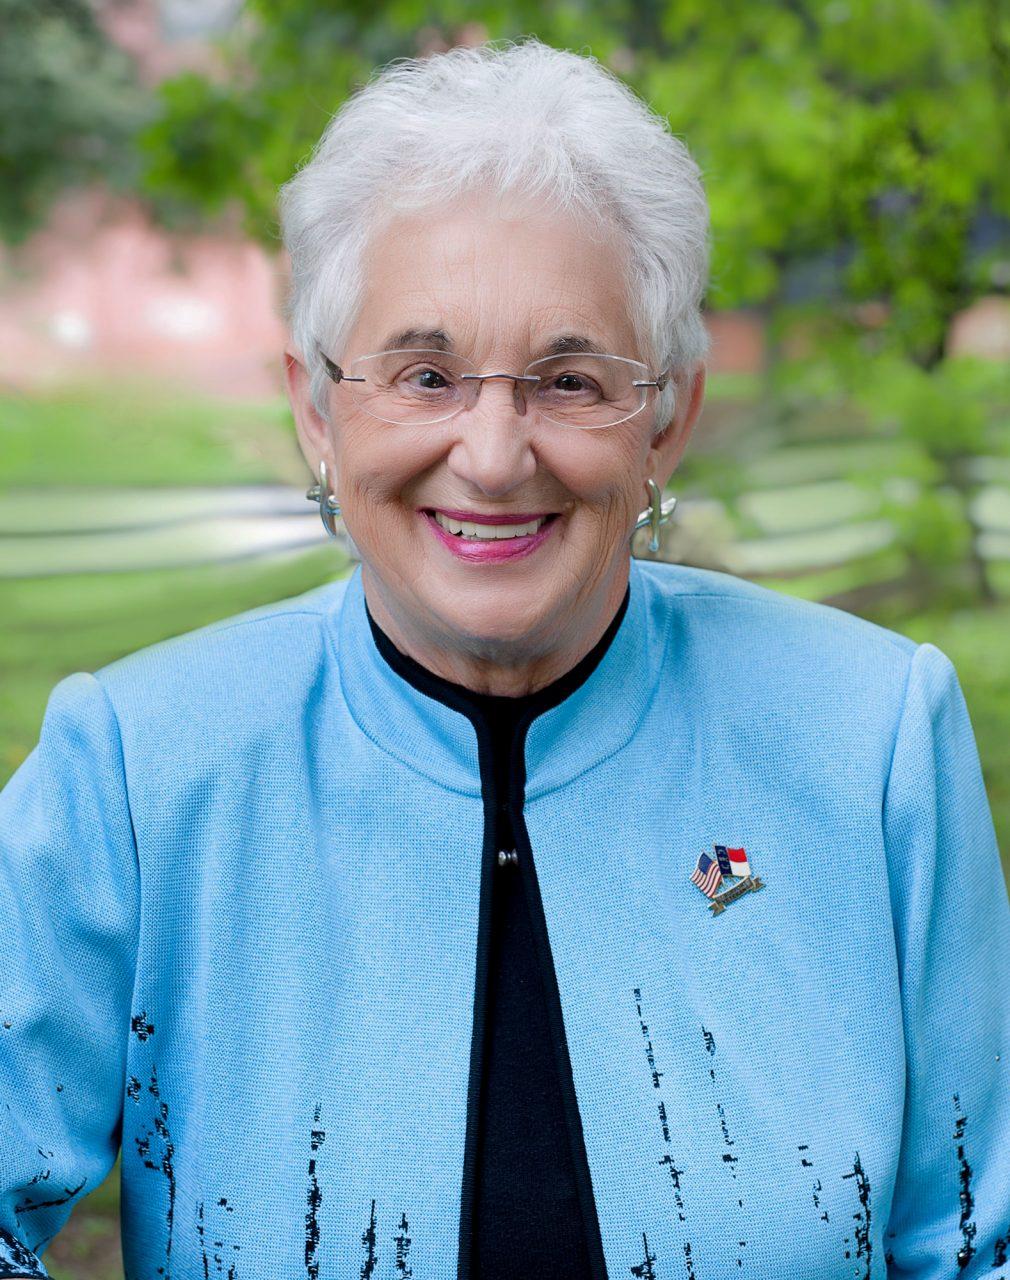 Congresswoman Virginia Foxx, incumbent republican candidate for the 5th congressional district. Foxx is running this fall to be elected for the 7th time.